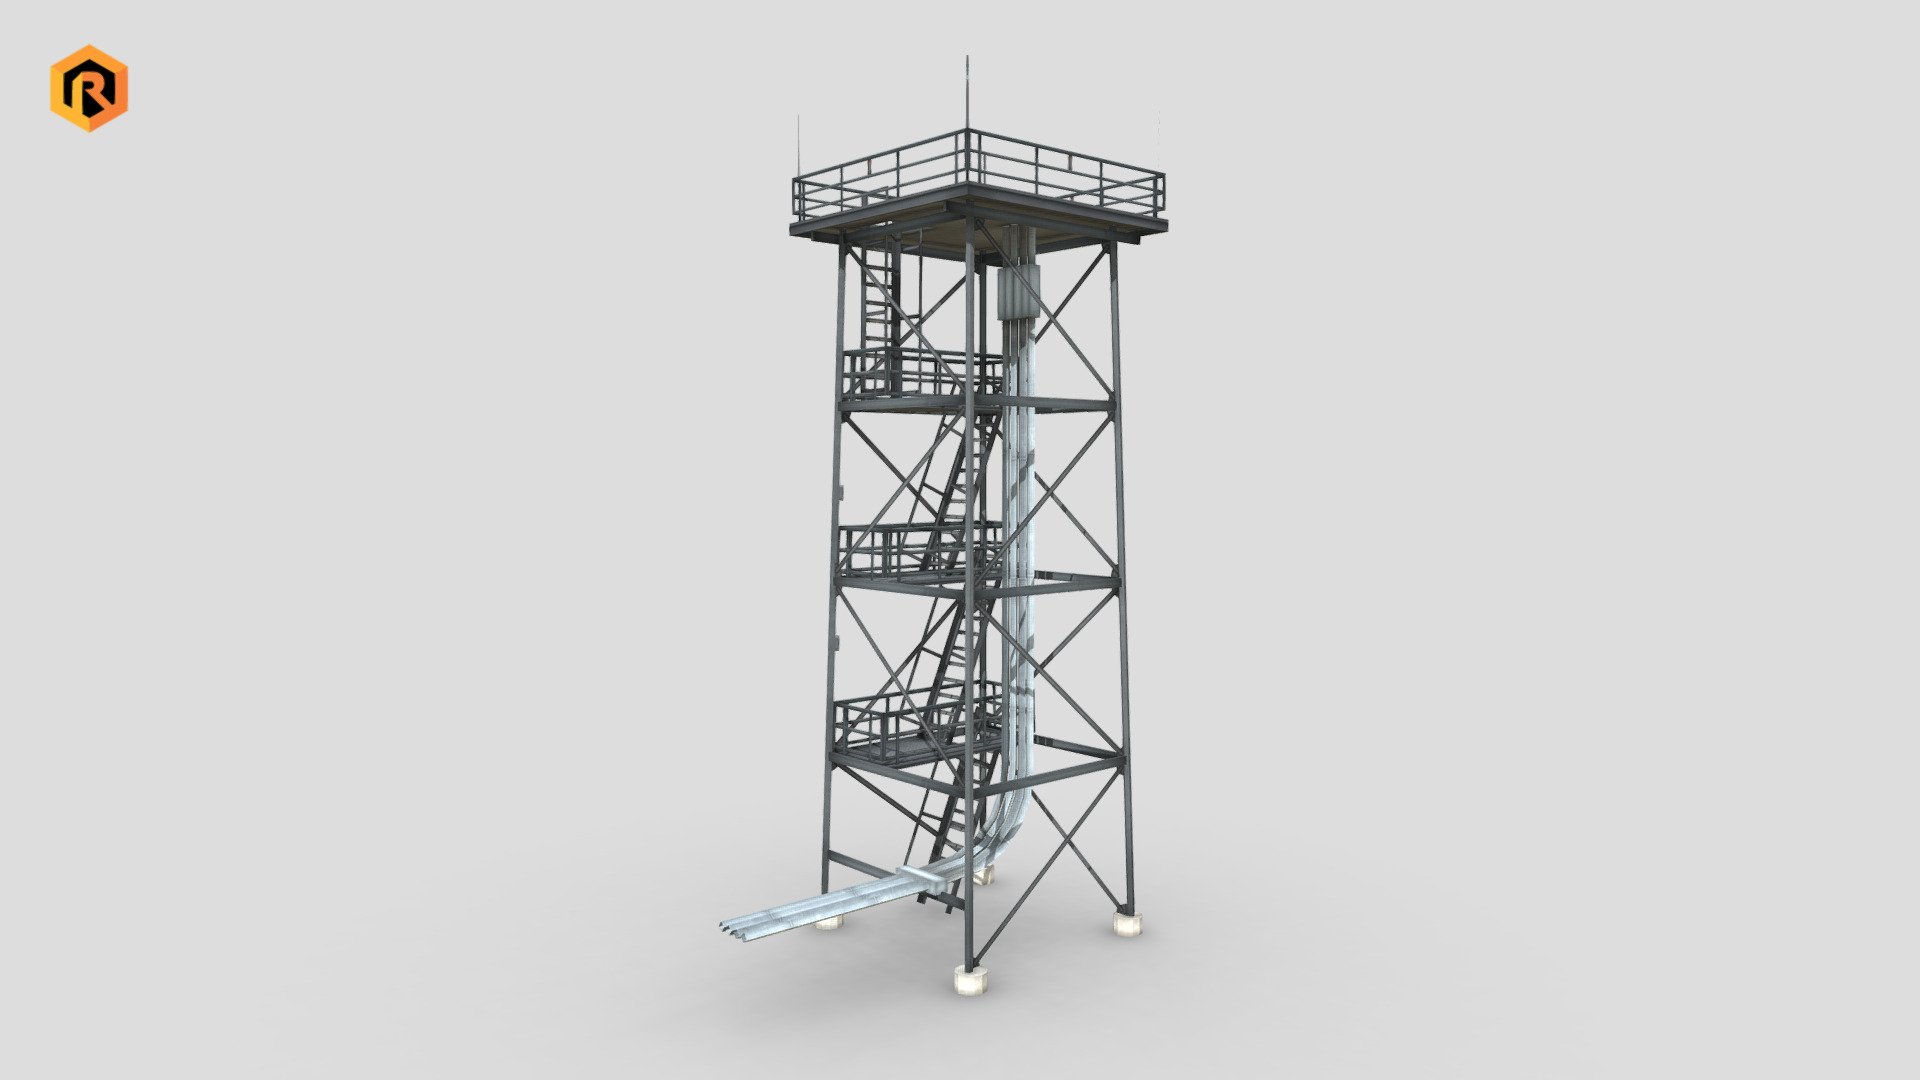 Low-poly 3D model of Guard Tower with some connection pipes.

It is best for use in games and other VR / AR, real-time applications such as Unity or Unreal Engine. 

It can also be rendered in Blender (ex Cycles) or Vray as the model is equipped with detailed textures.  

You can also get this model in a bundle: https://skfb.ly/owqyZ

Technical details:  




2048 x 2048 Diffuse and AO texture set  

978 Triangles  

854 Vertices  

Model is one mesh.  

Model completely unwrapped.  

Model is fully textured with all materials applied.   

Pivot point centered at world origin.  

All nodes, materials and textures are appropriately named.

Lot of additional file formats included (Blender, Unity, Maya etc.)  

More file formats are available in additional zip file on product page.

Please feel free to contact me if you have any questions or need any support for this asset.

Support e-mail: support@rescue3d.com - Guard Tower - Buy Royalty Free 3D model by Rescue3D Assets (@rescue3d) 3d model